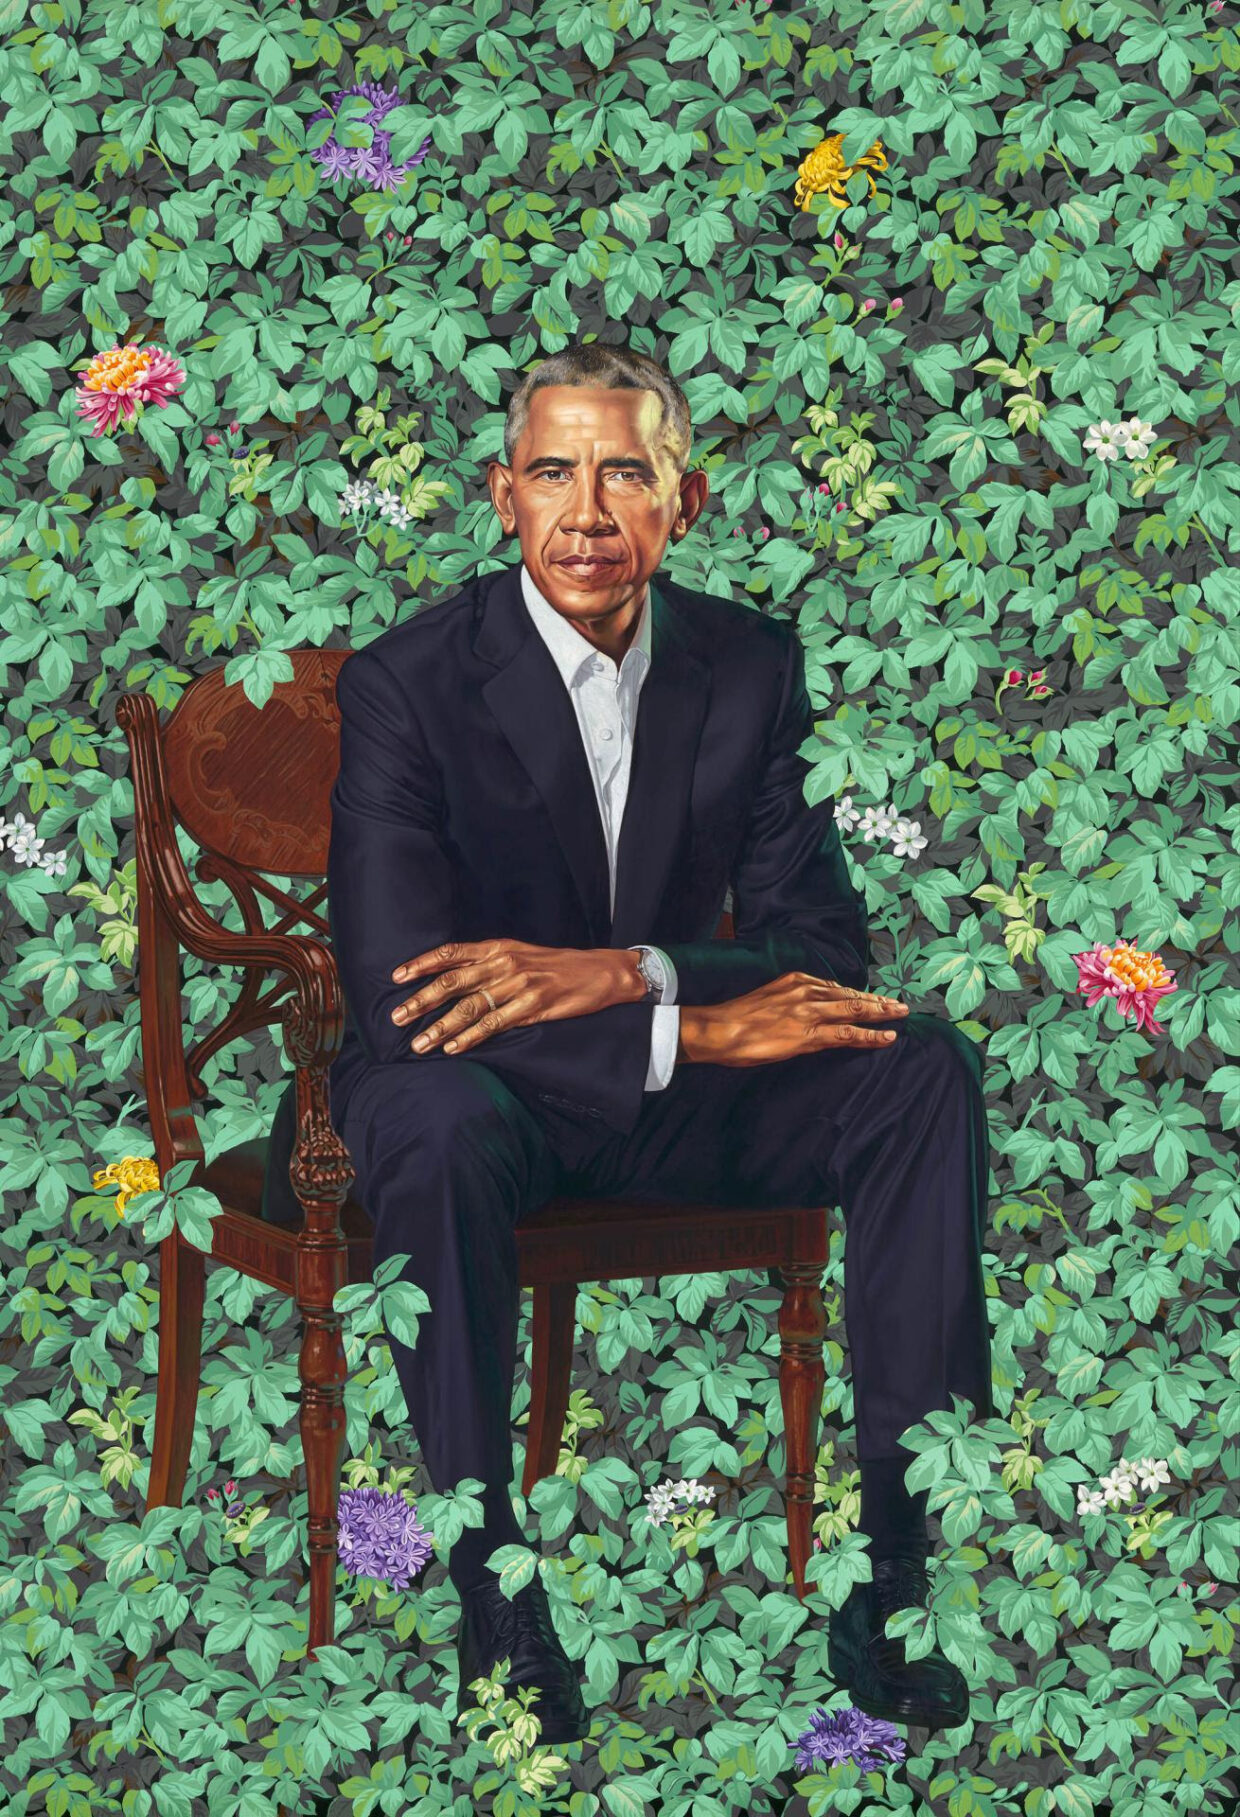 Creative Exchange Agency is pleased to announce the unveiling of Kehinde Wiley’s portrait of former president Barack Obama | 1